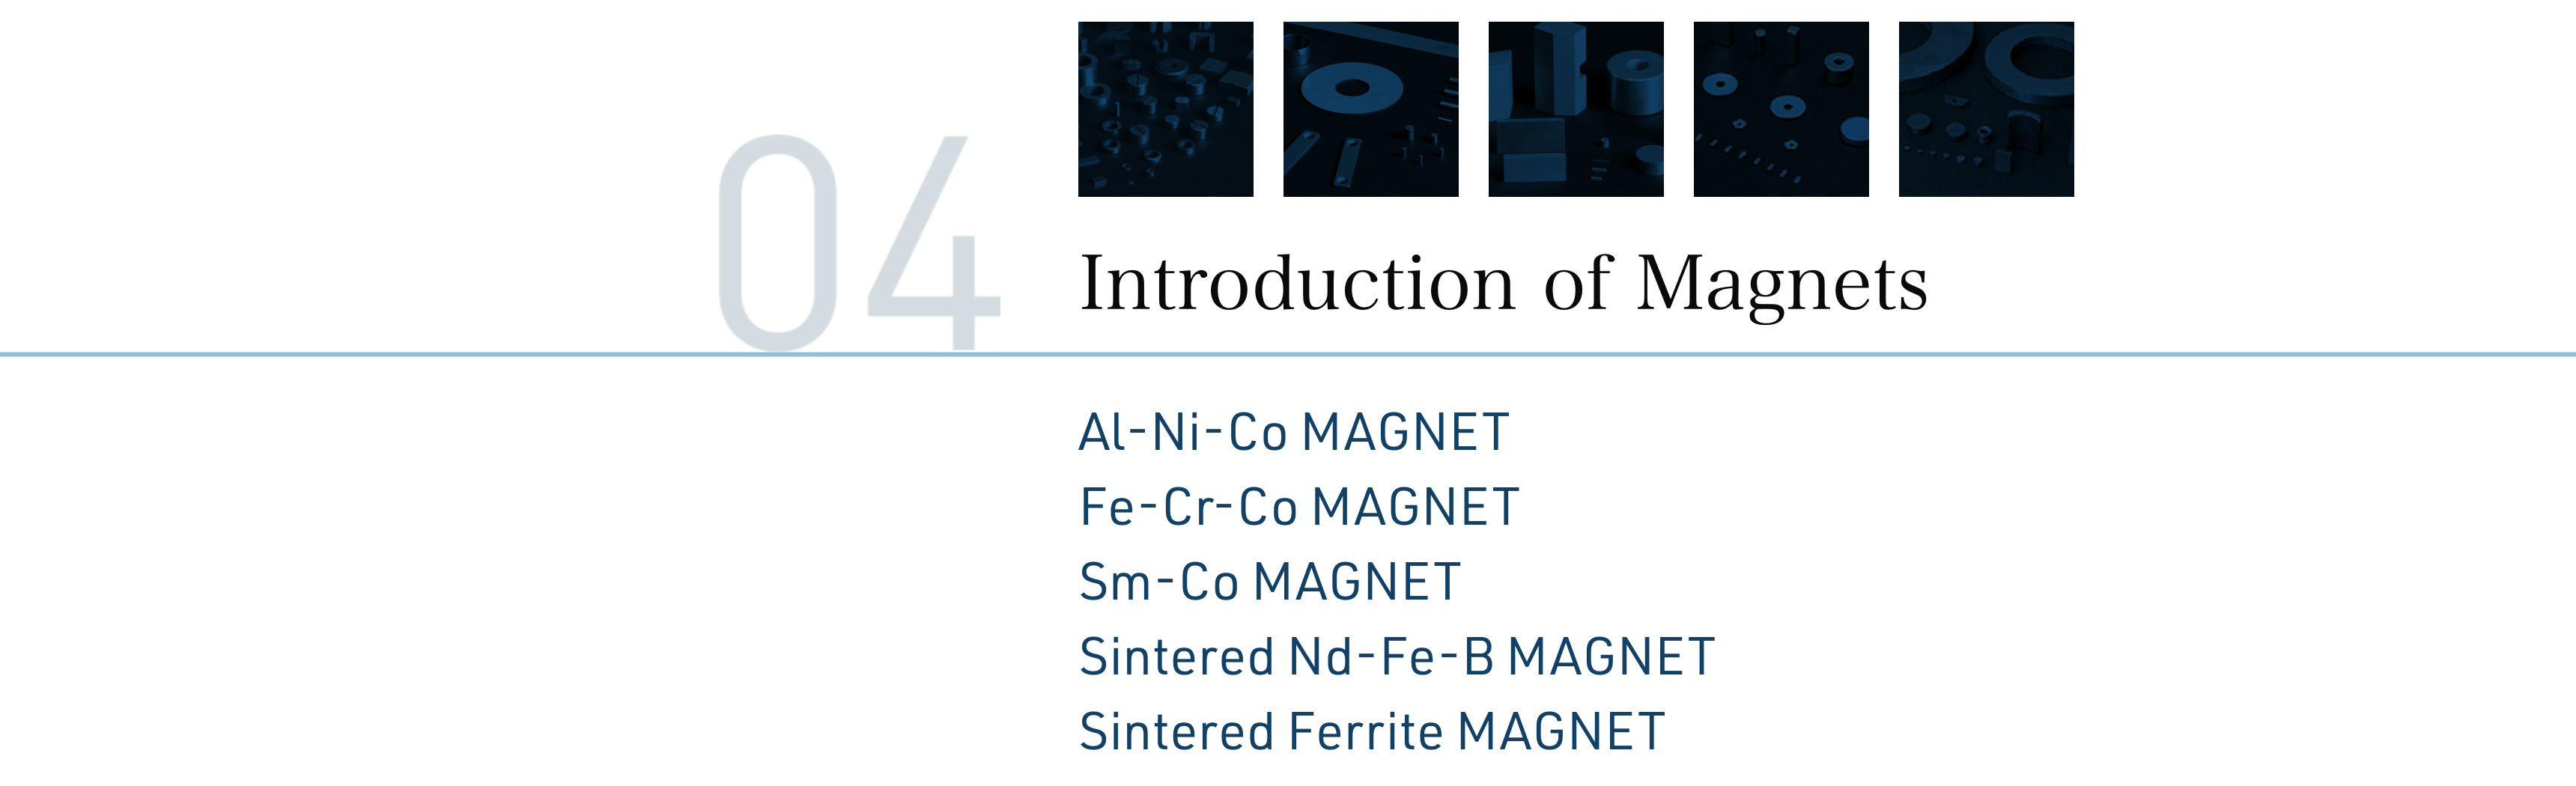 Introduction of Magnets